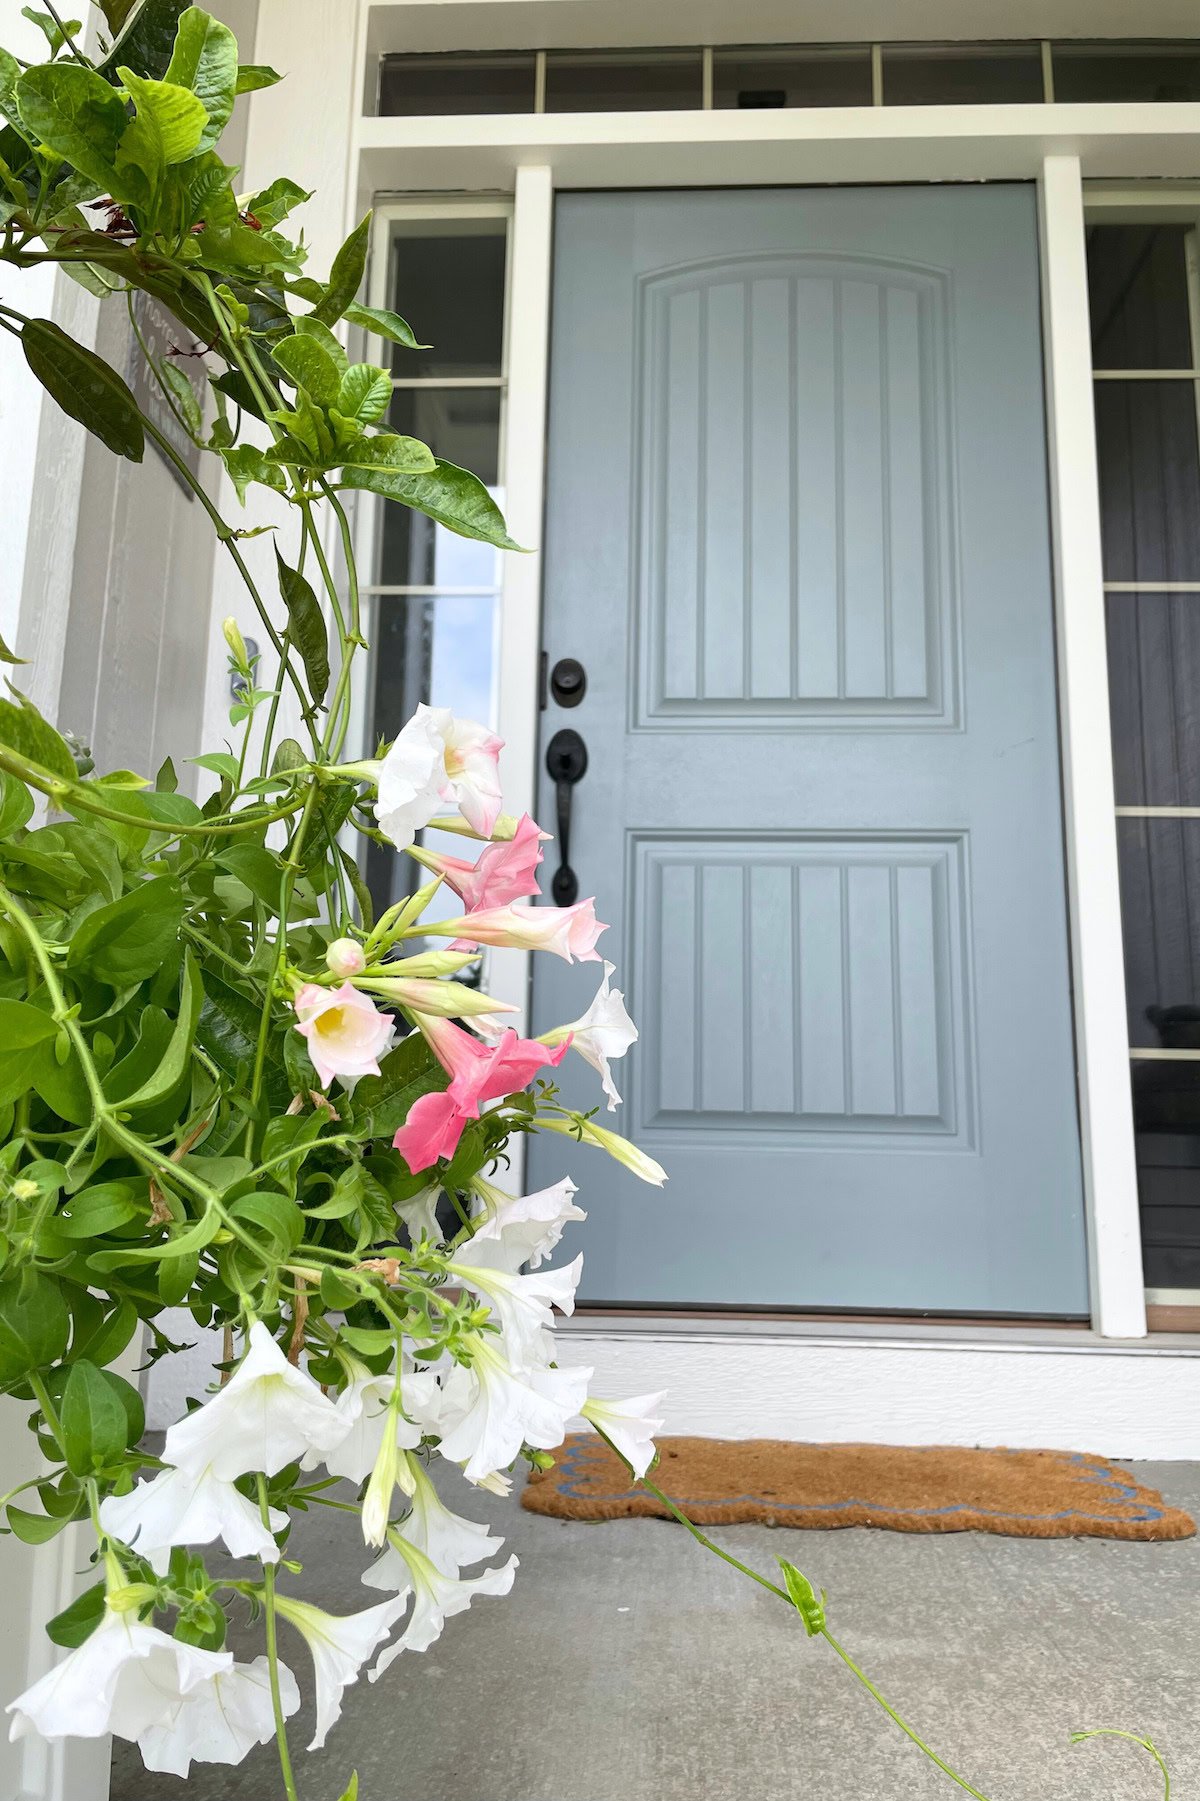 A light blue front door, painted in Benjamin Moore Brewster Gray, is framed by white and pink flowers on green vines. The door is set within a wooden porch, and a brown doormat lies in front of it.